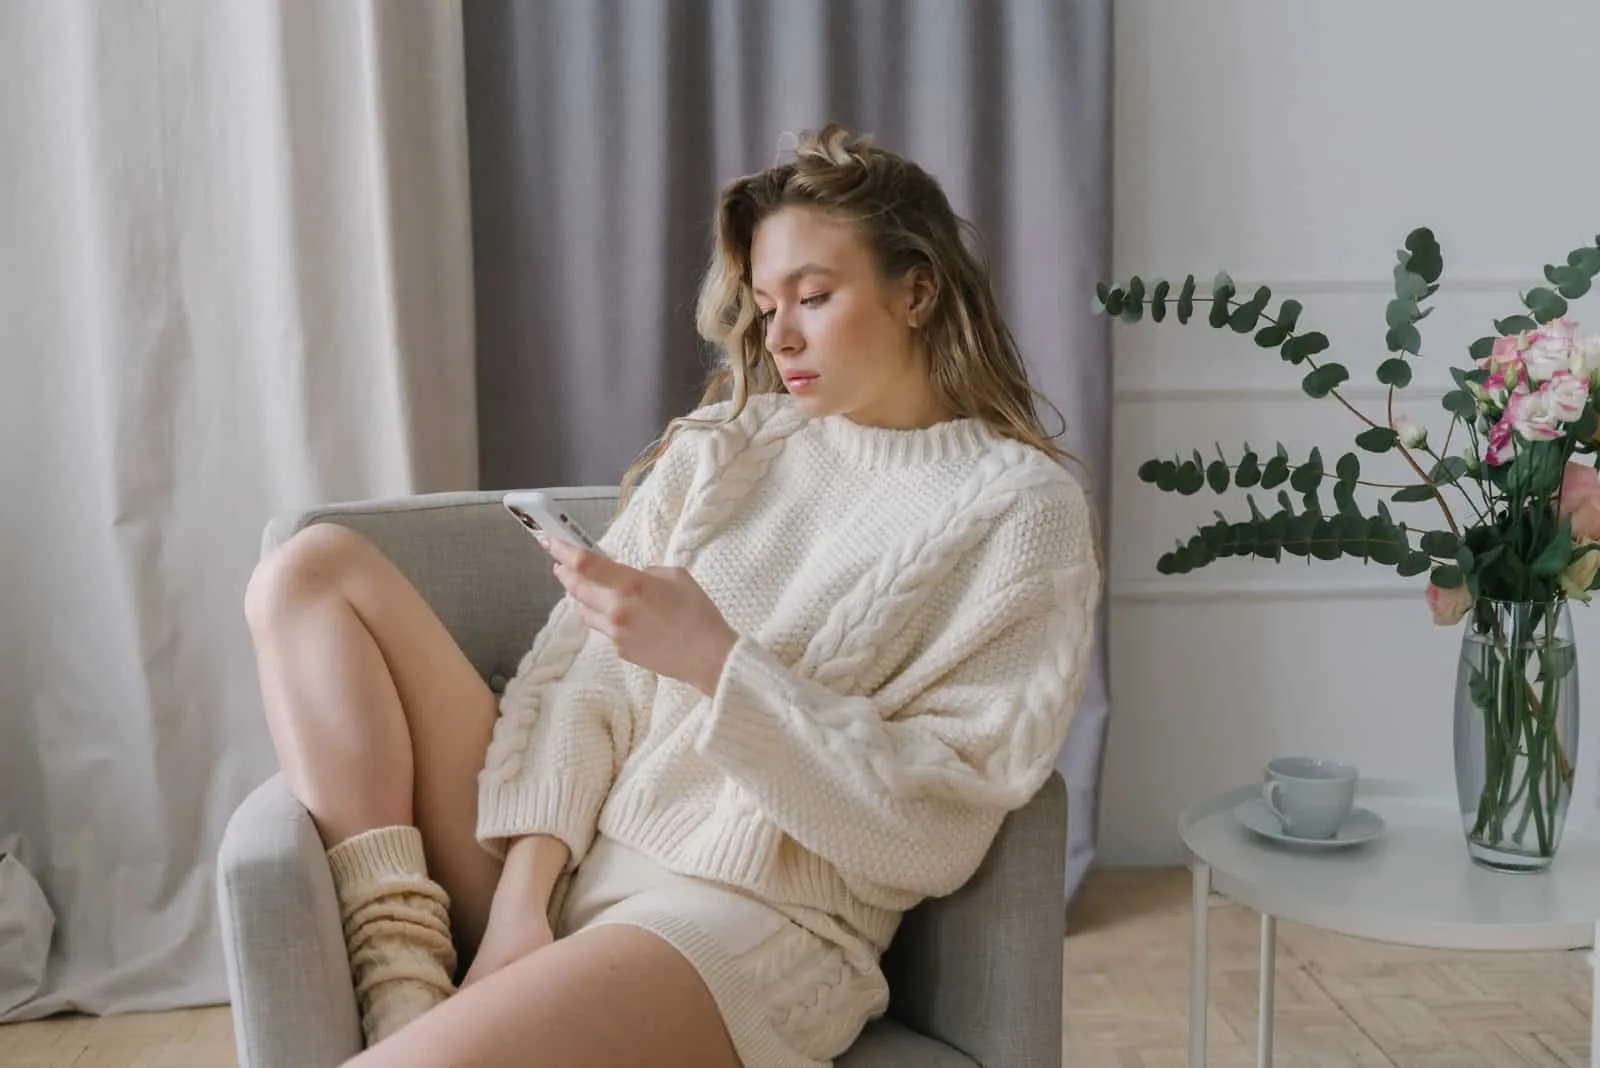 woman using smartphone while sitting on gray armchair